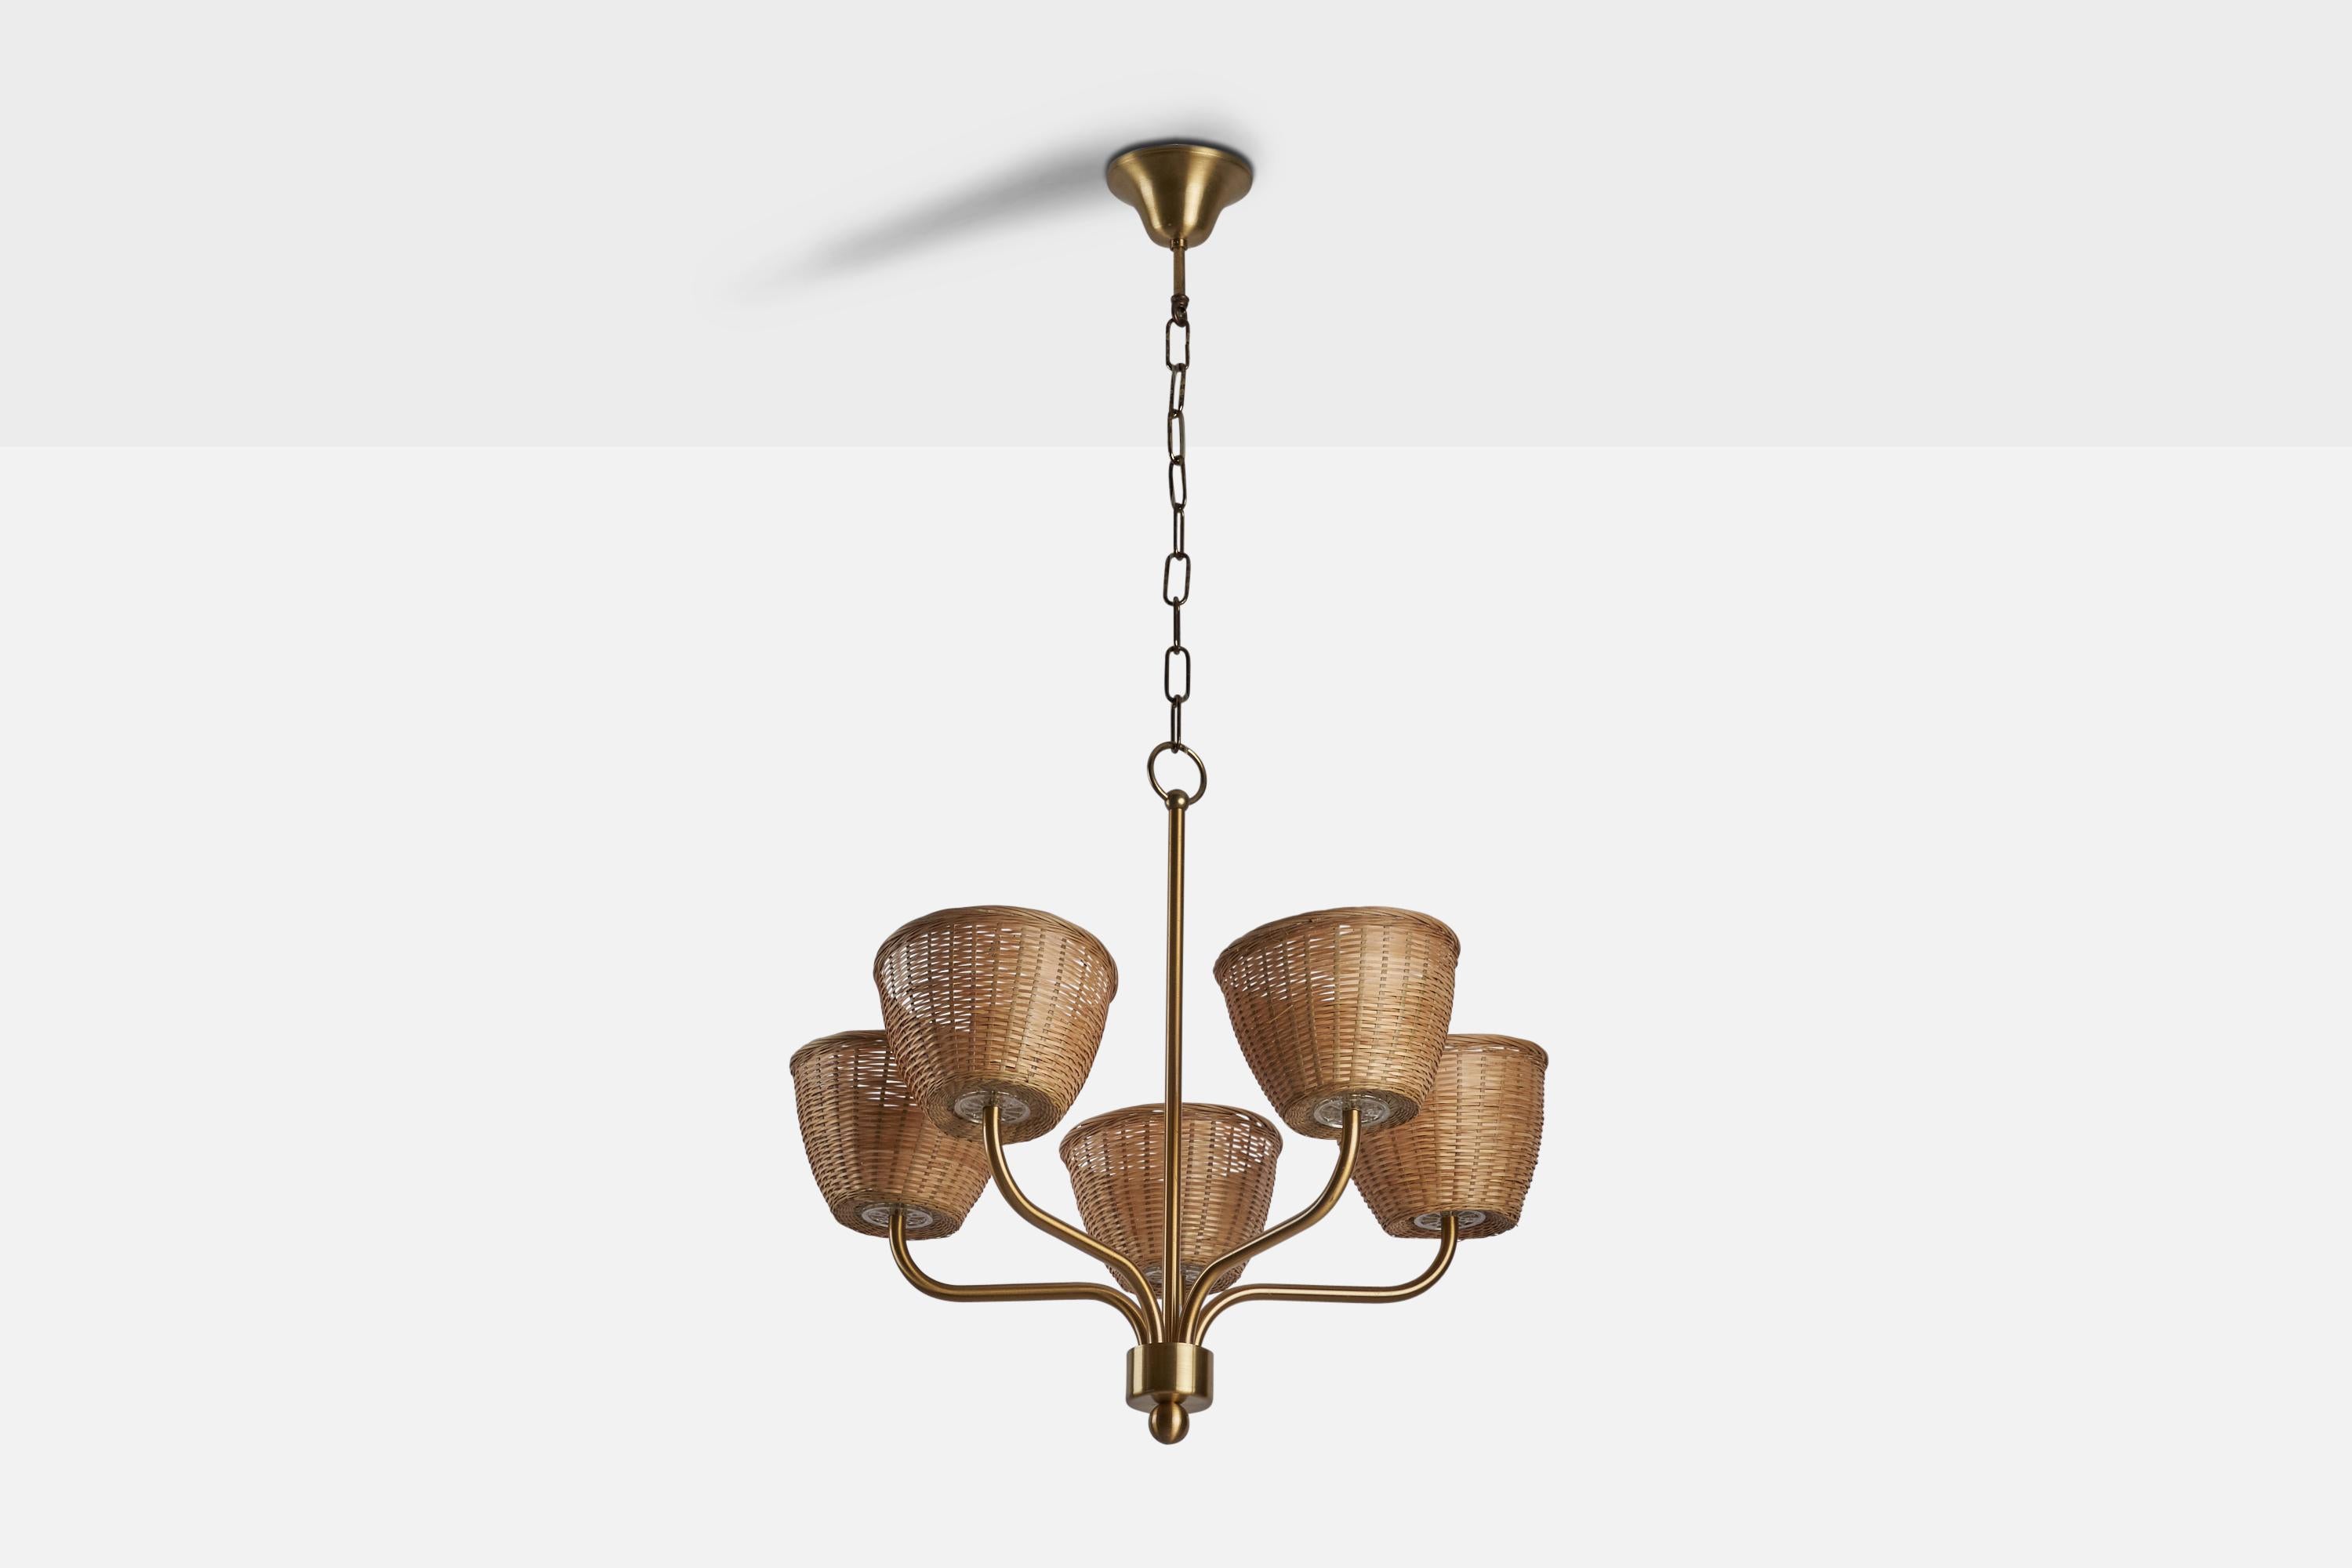 
A brass and rattan chandelier designed by Uno Kristiansson and produced by Luxus, Vittsjö, Sweden, c. 1960s.
Dimensions of canopy (inches) : 2.14” H x 2.38” Diameter
Socket takes standard E-26 bulbs. 5 sockets.There is no maximum wattage stated on